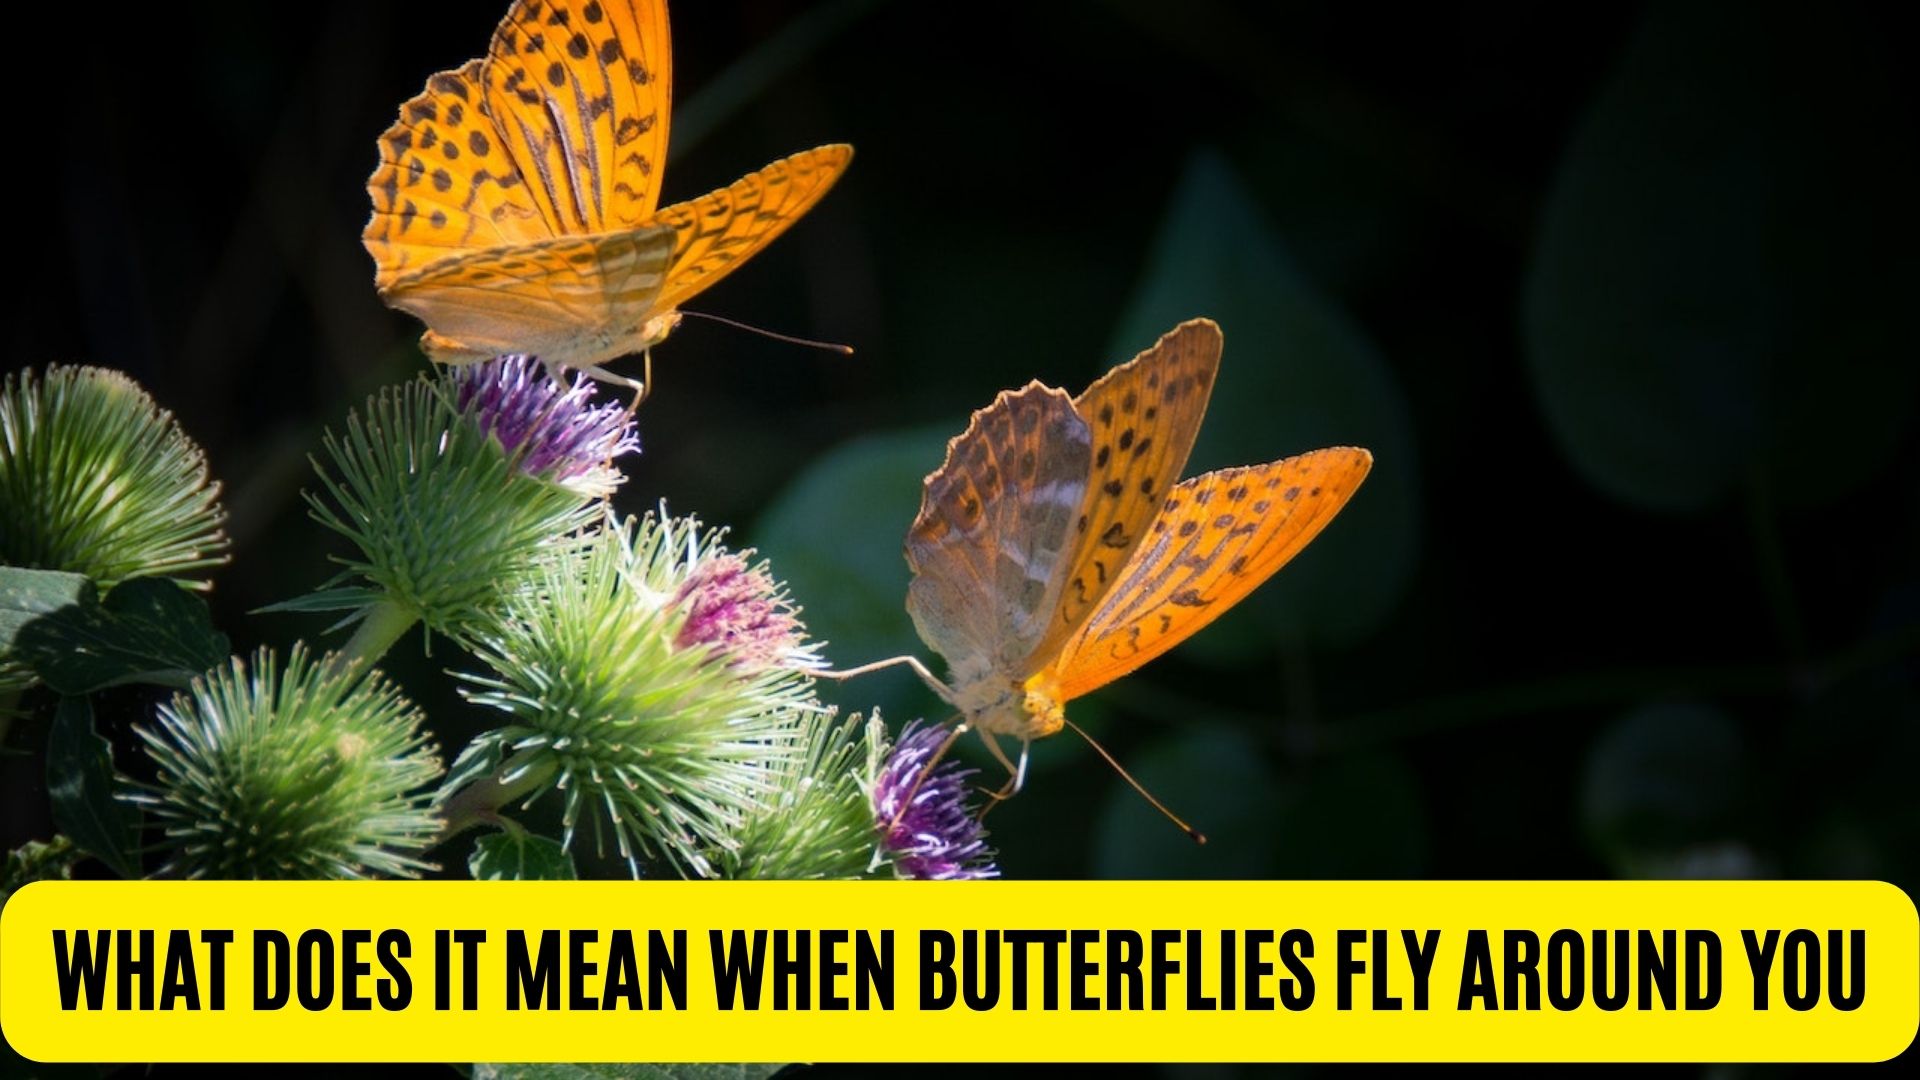 What Does It Mean When Butterflies Fly Around You?